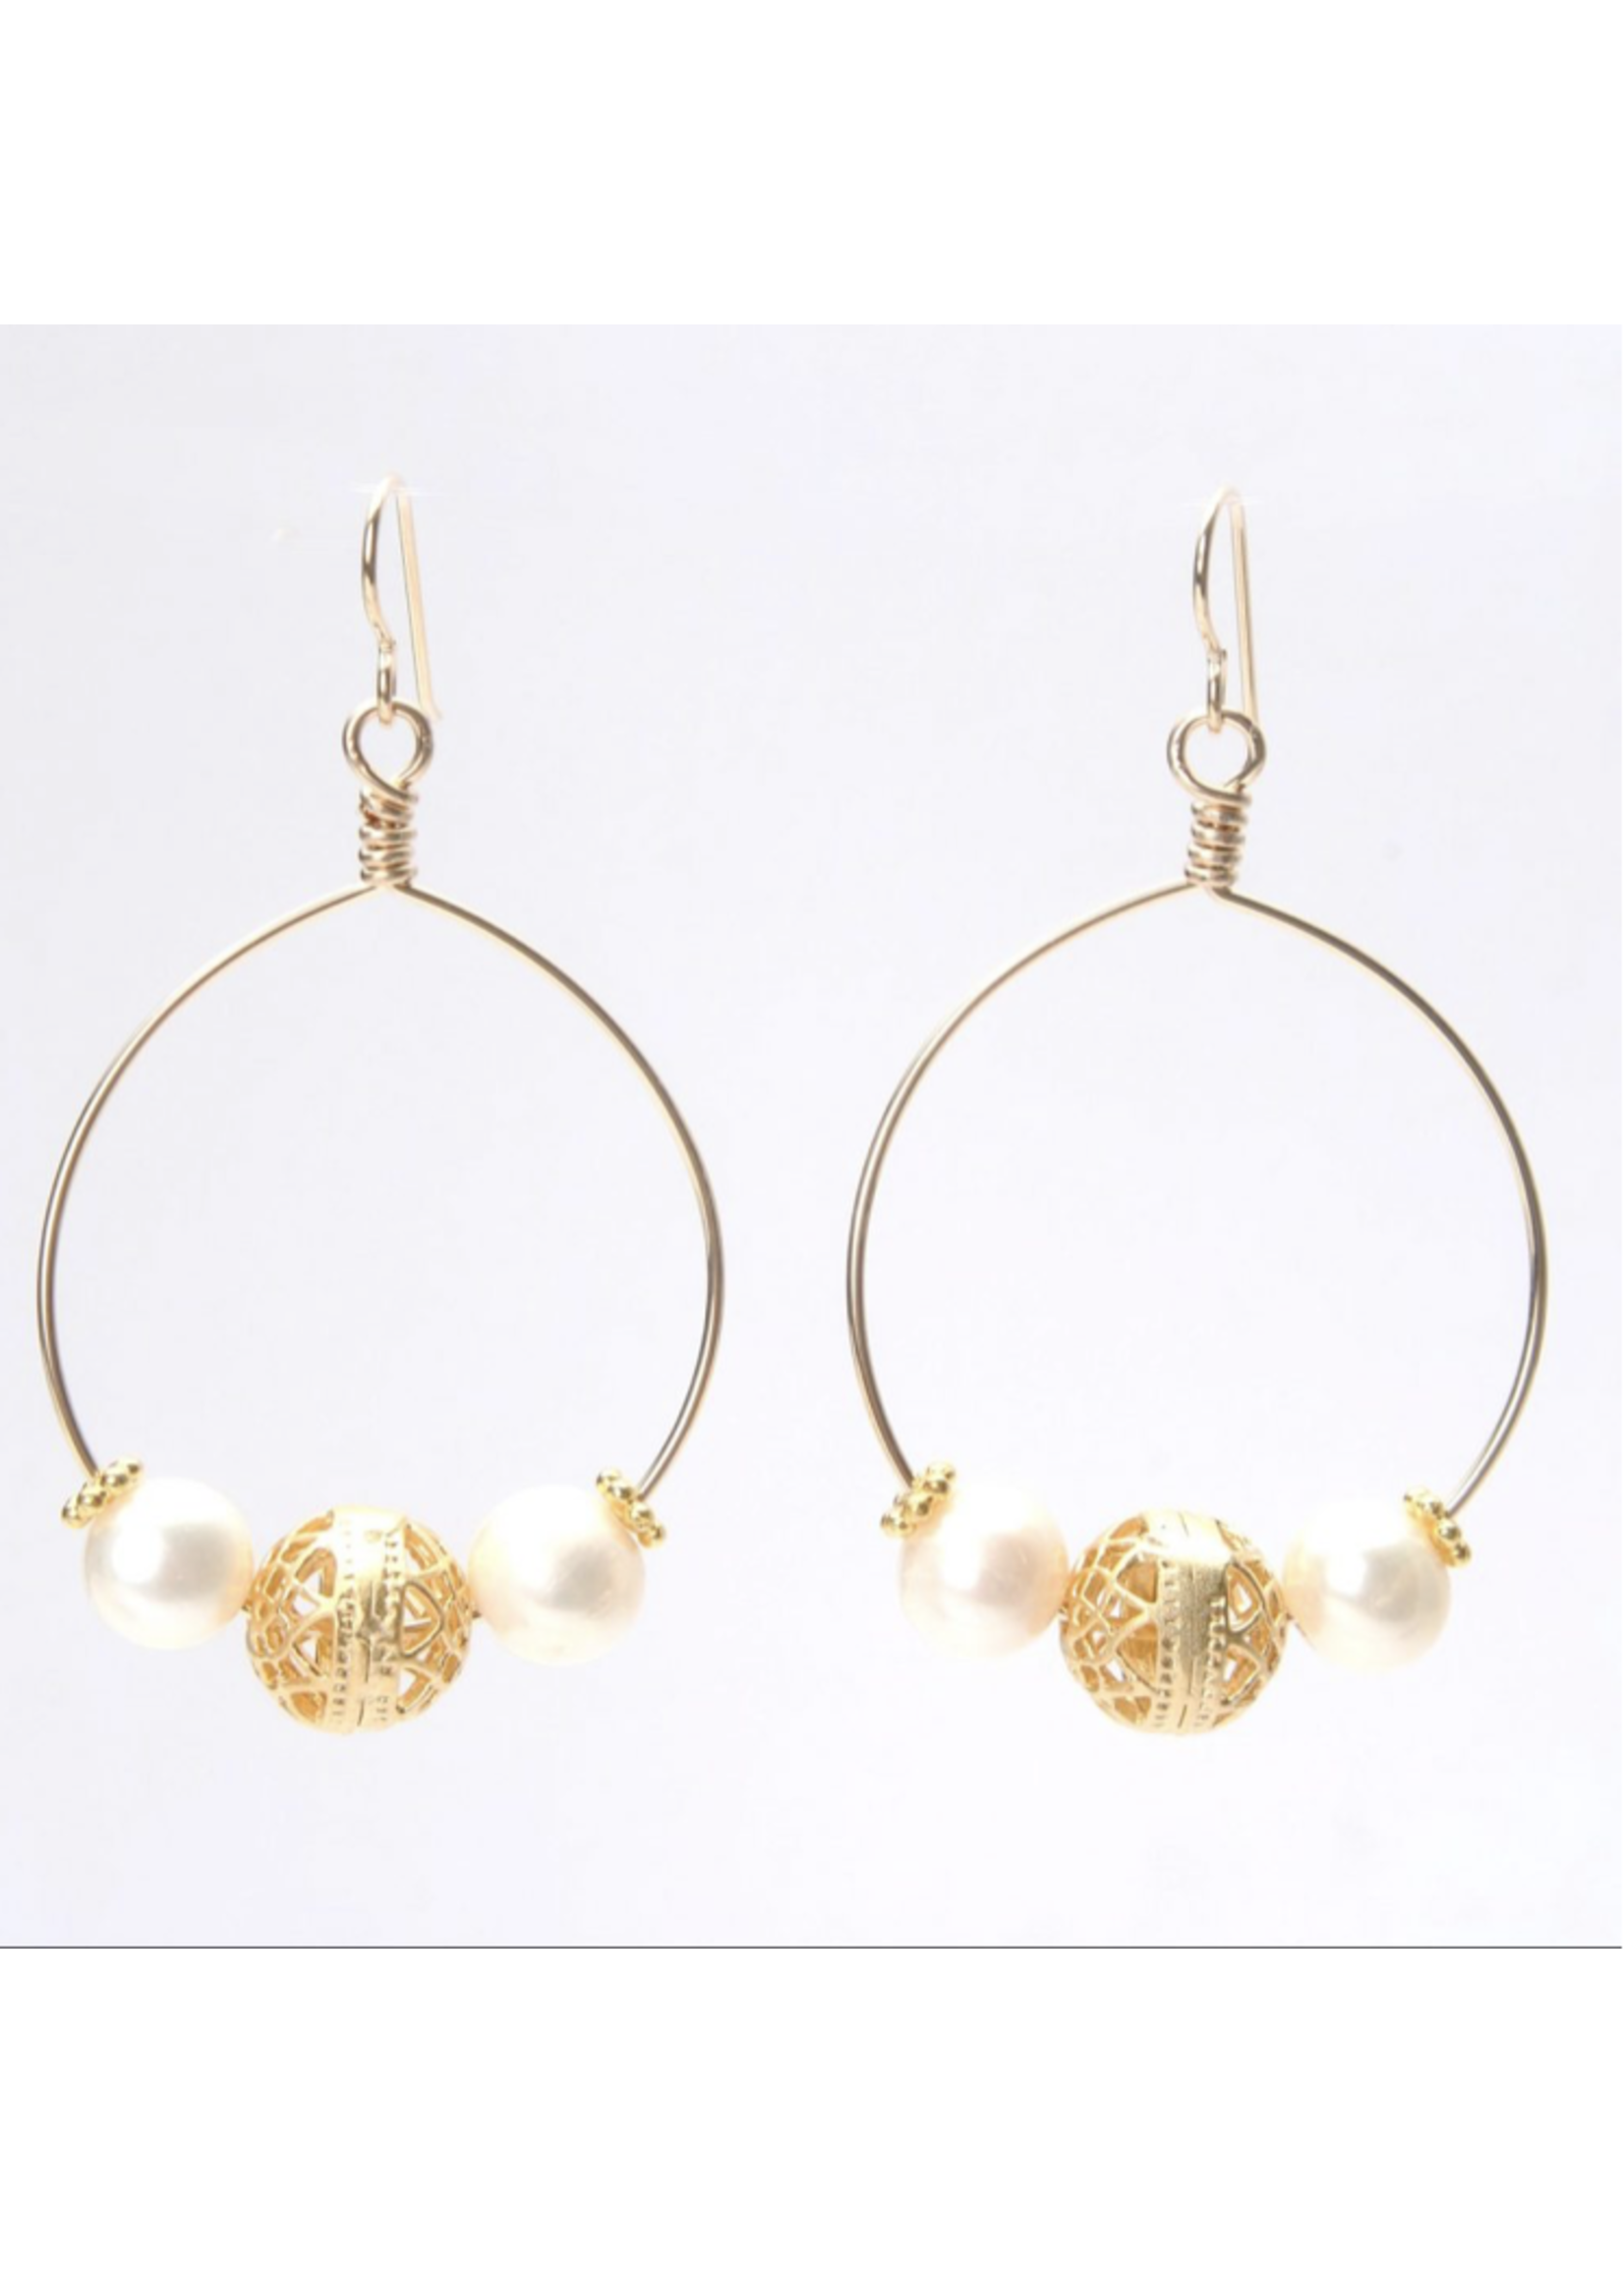 Wendy Perry Designs GP Pearl Isabel Cristina Earring